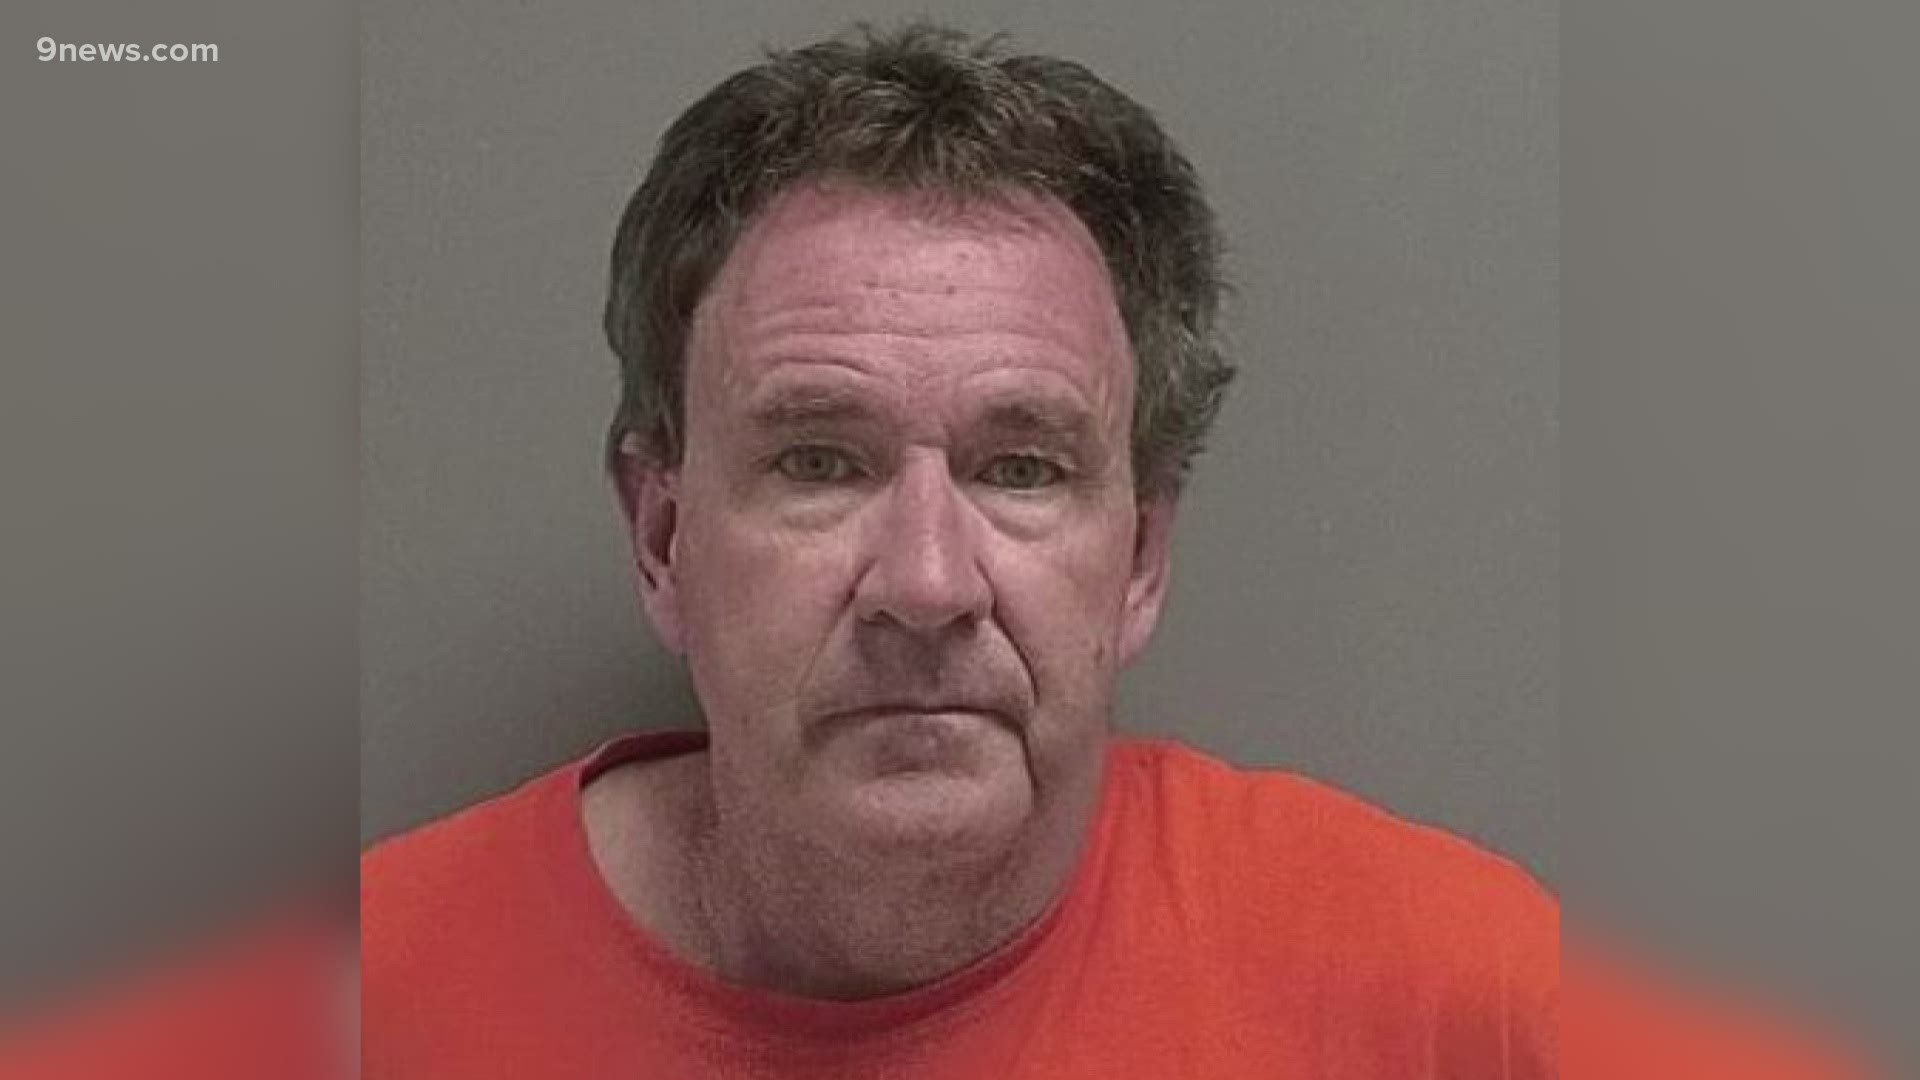 Ronald James Braden, 55, cut off his GPS tracking device on Nov. 13 and was found in Arizona Friday, Vail Police said.